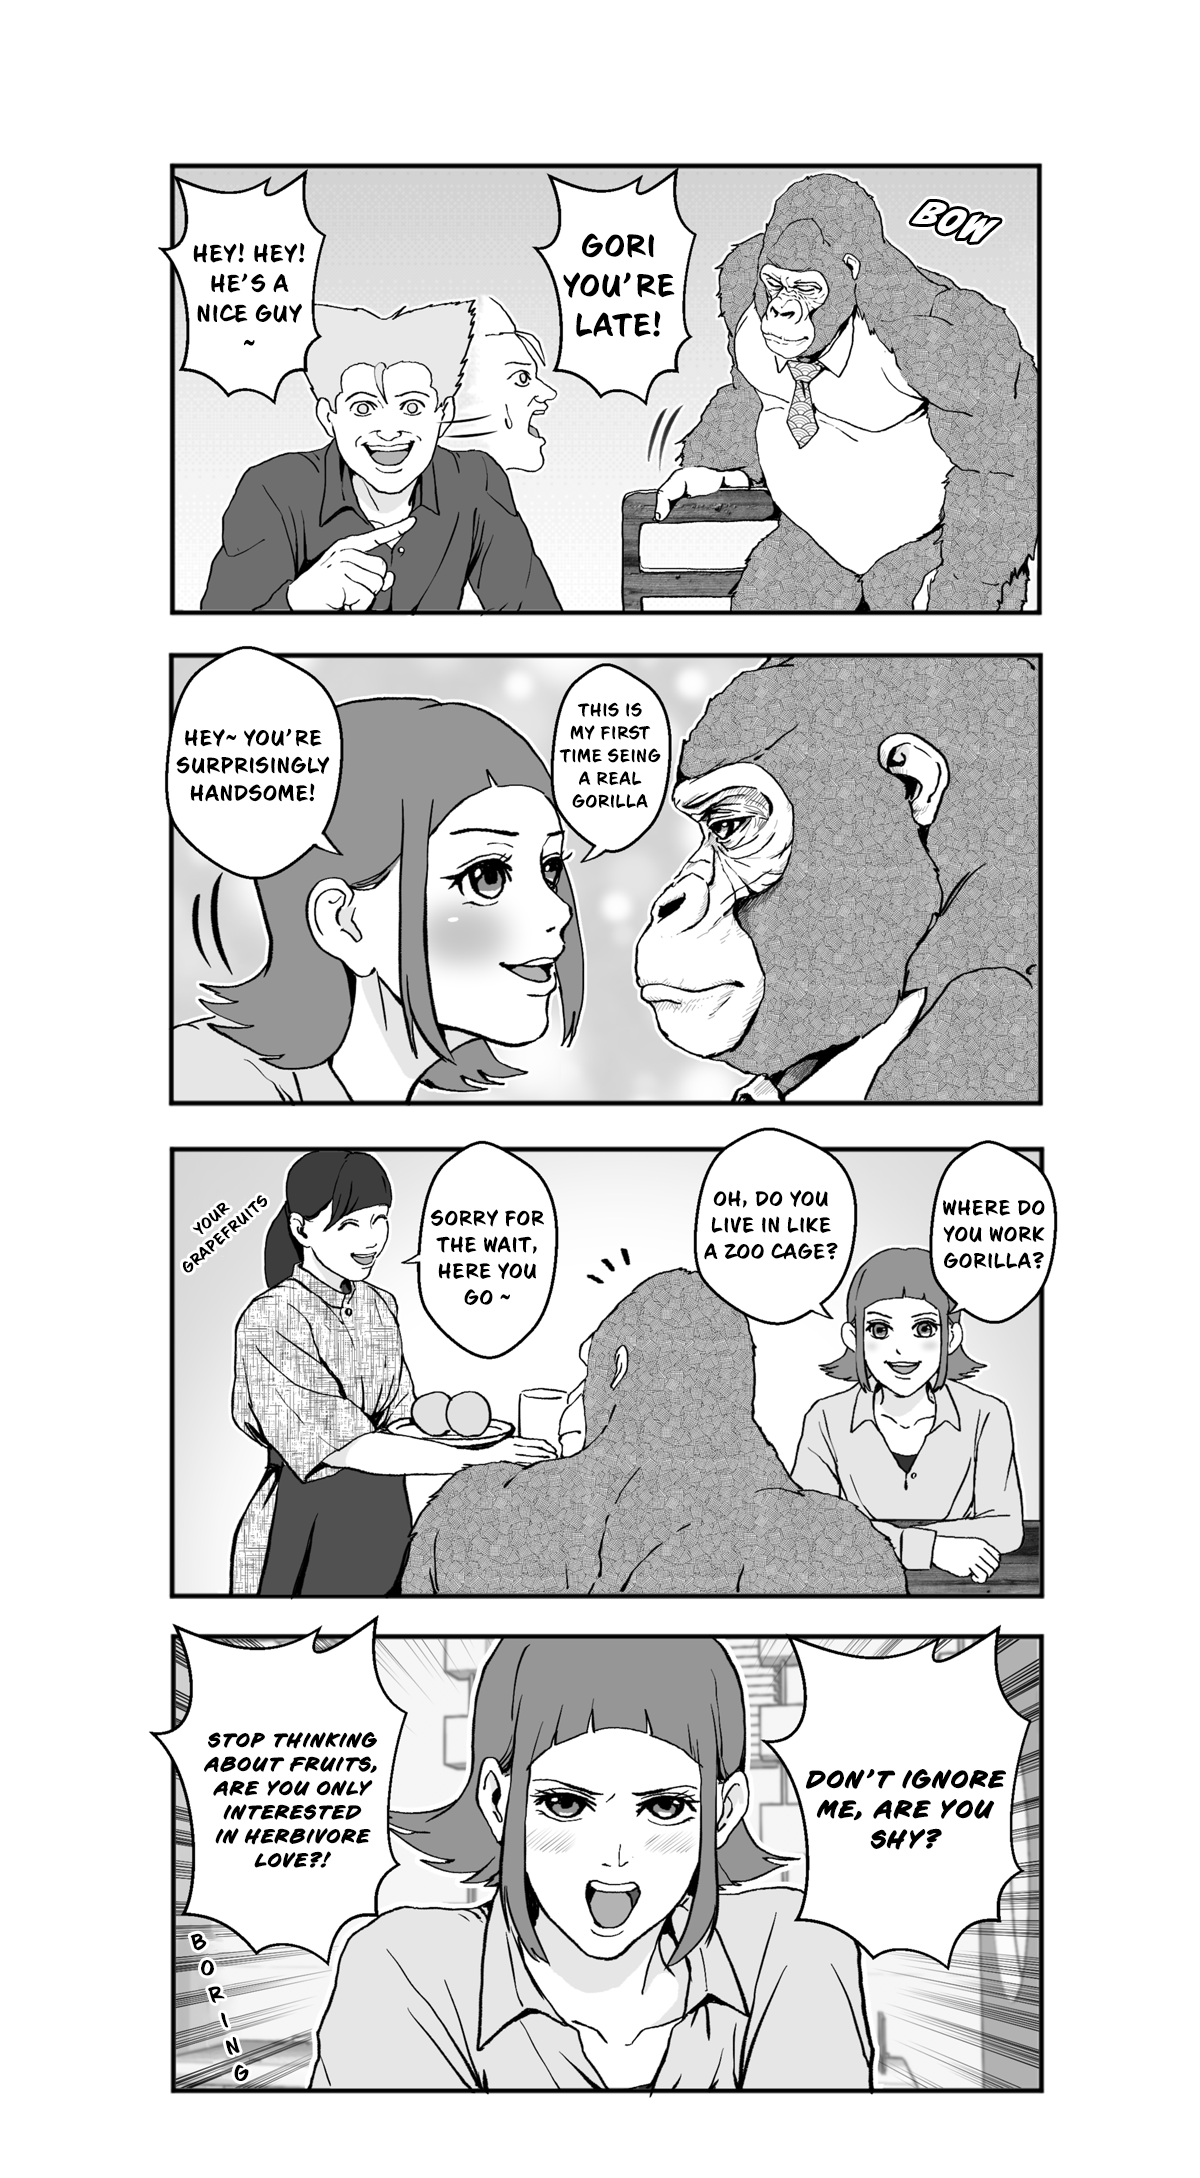 An Extremely Attractive Gorilla - Page 3